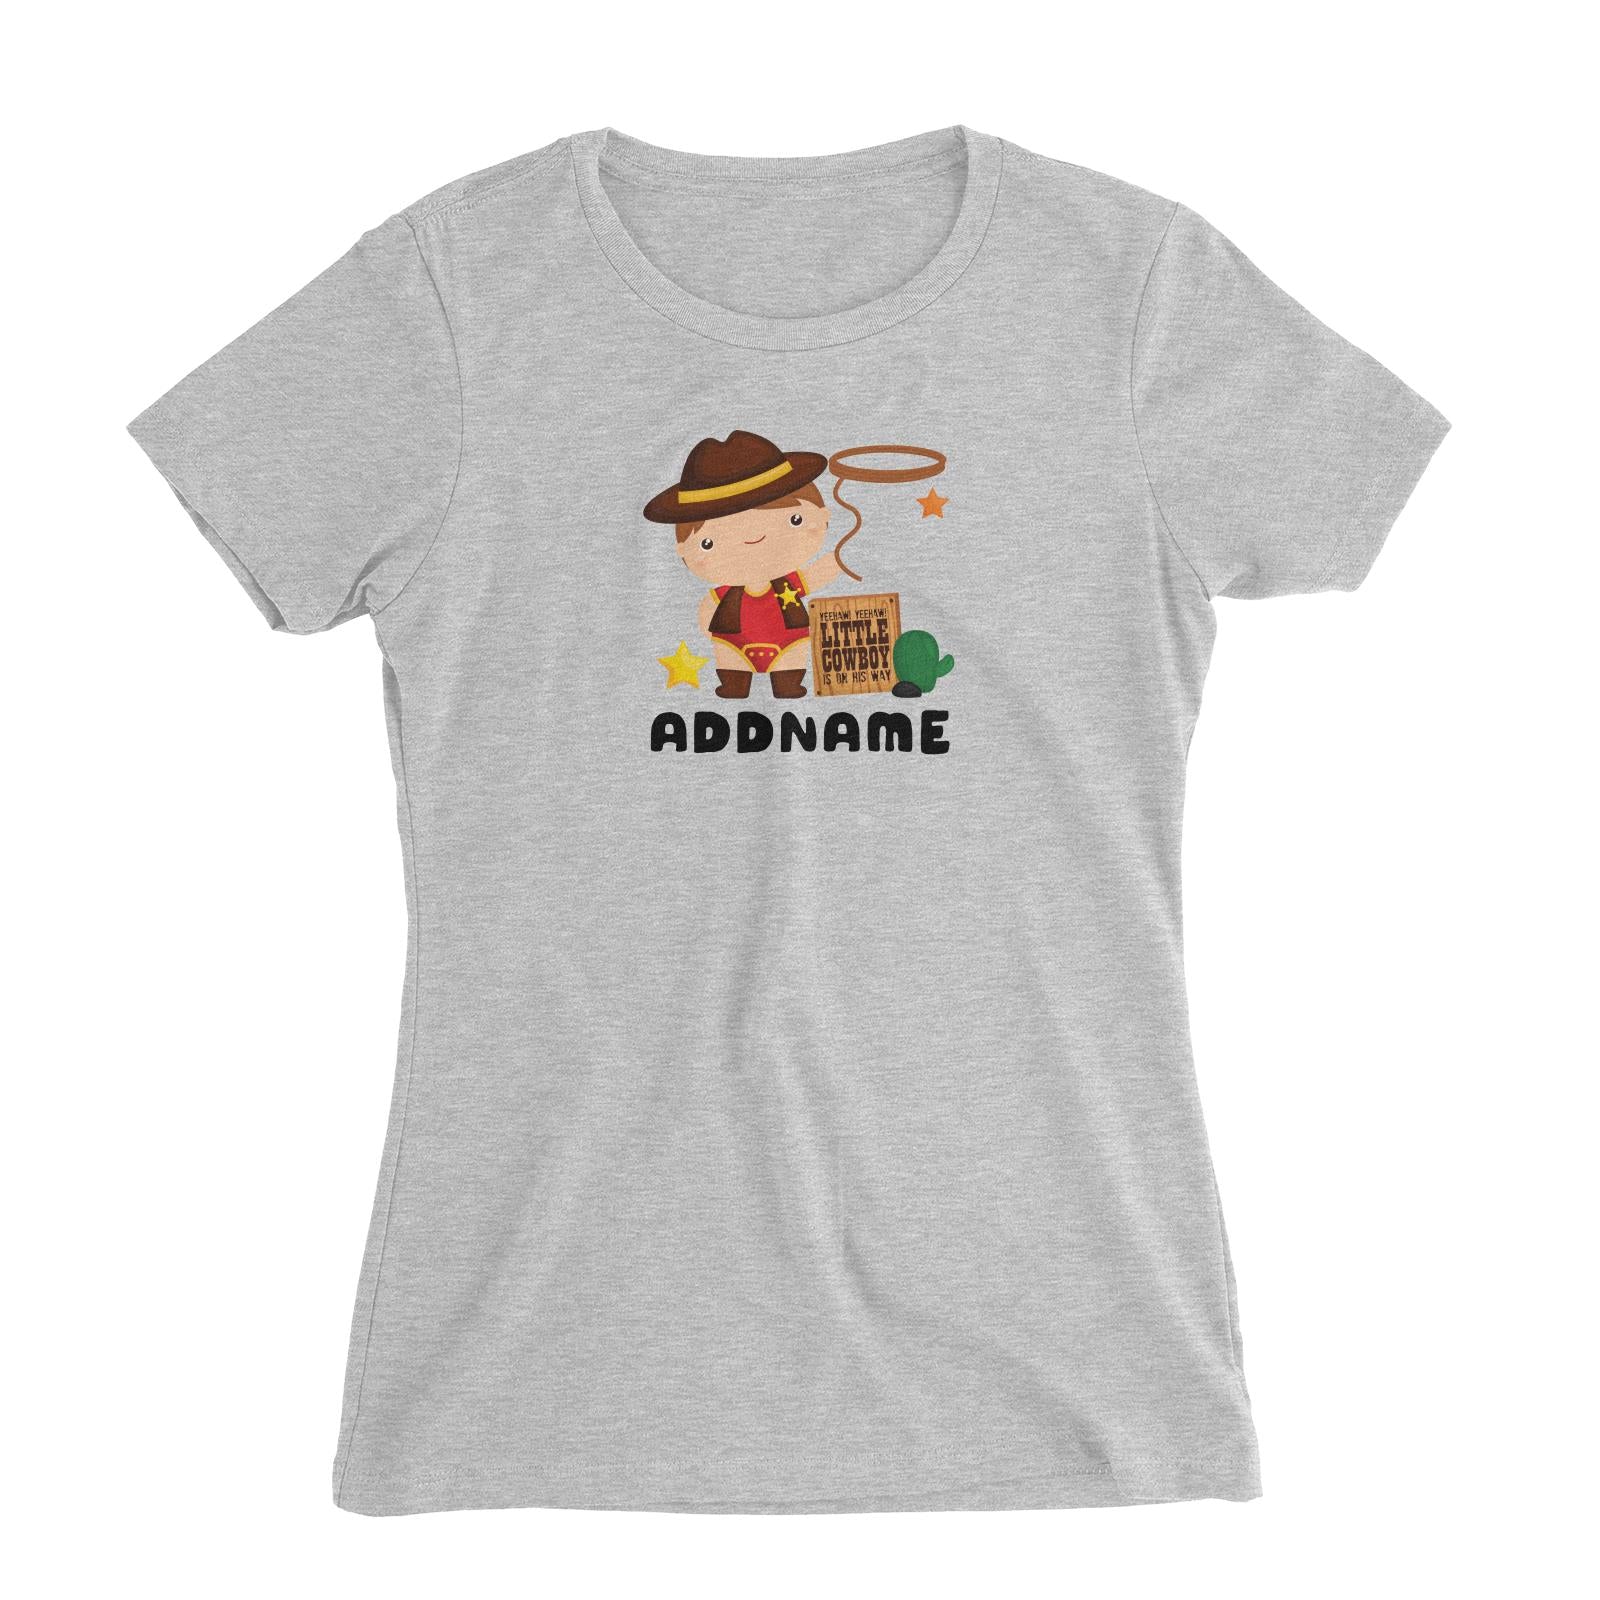 Birthday Cowboy Style Yeehaw Little Cowboy Is On His Way Addname Women's Slim Fit T-Shirt